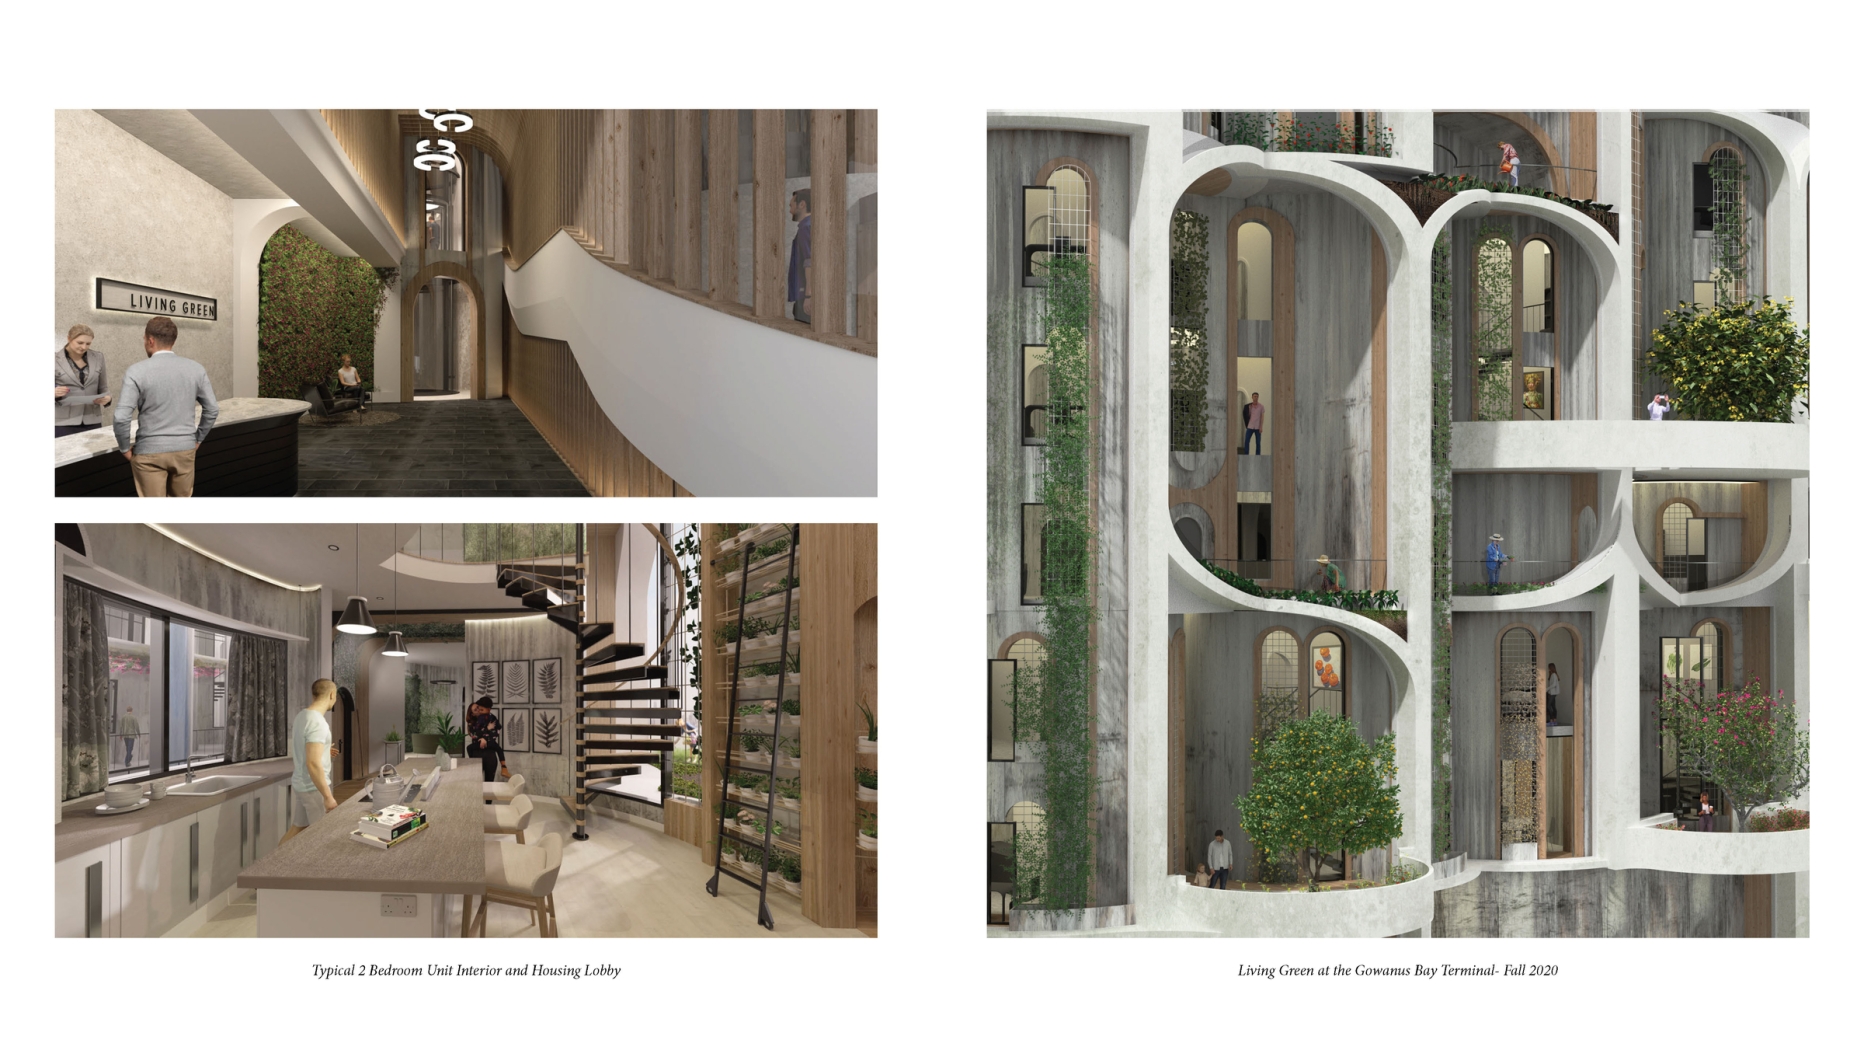 Rendering of lobby and facade of same building with curved walls and many green spaces and balconies